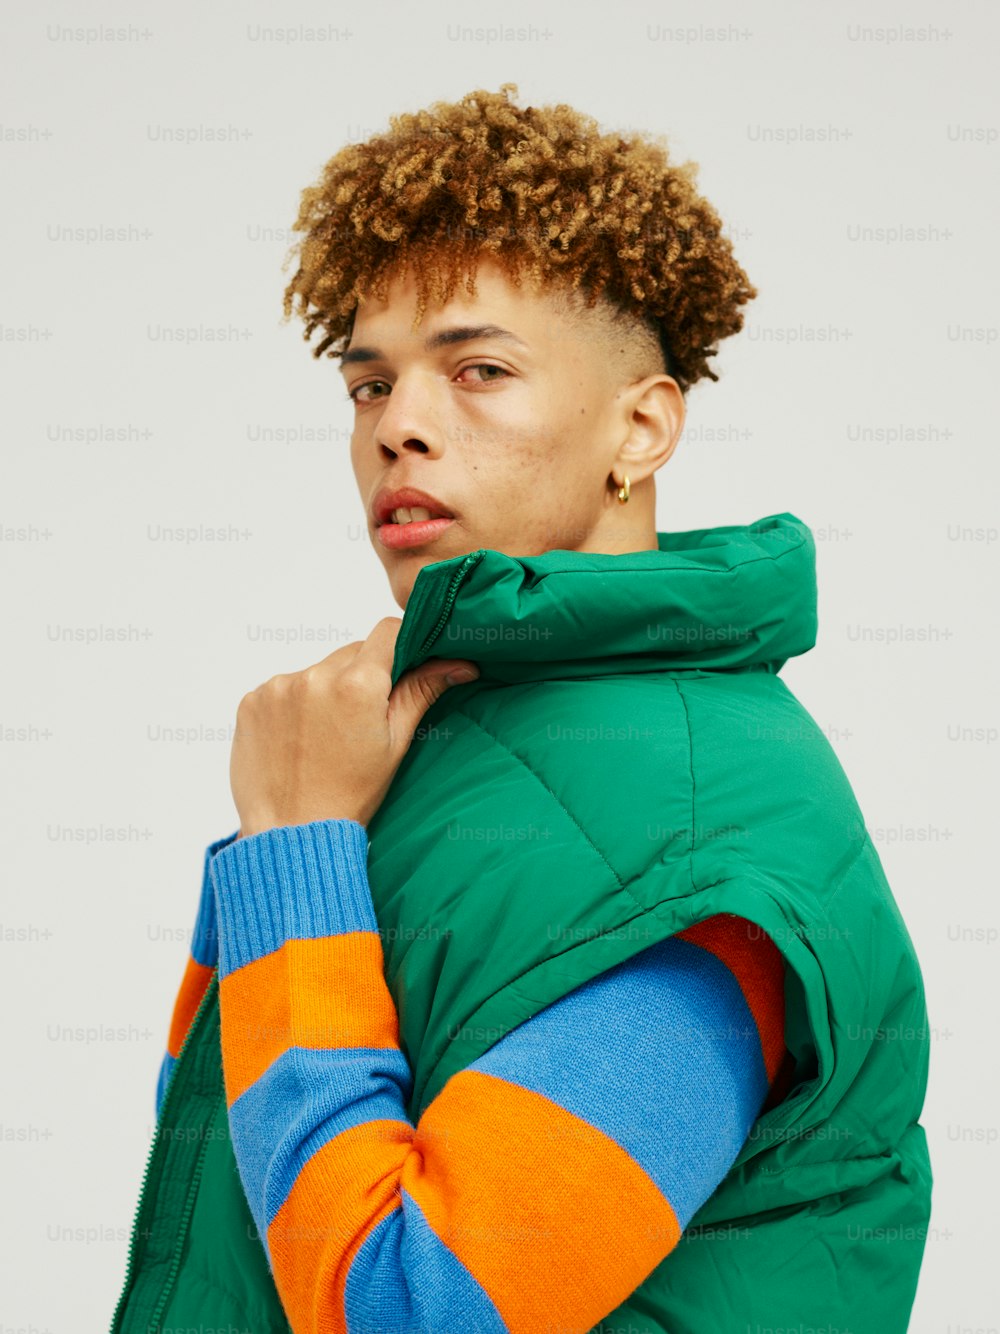 a man with curly hair wearing a green jacket